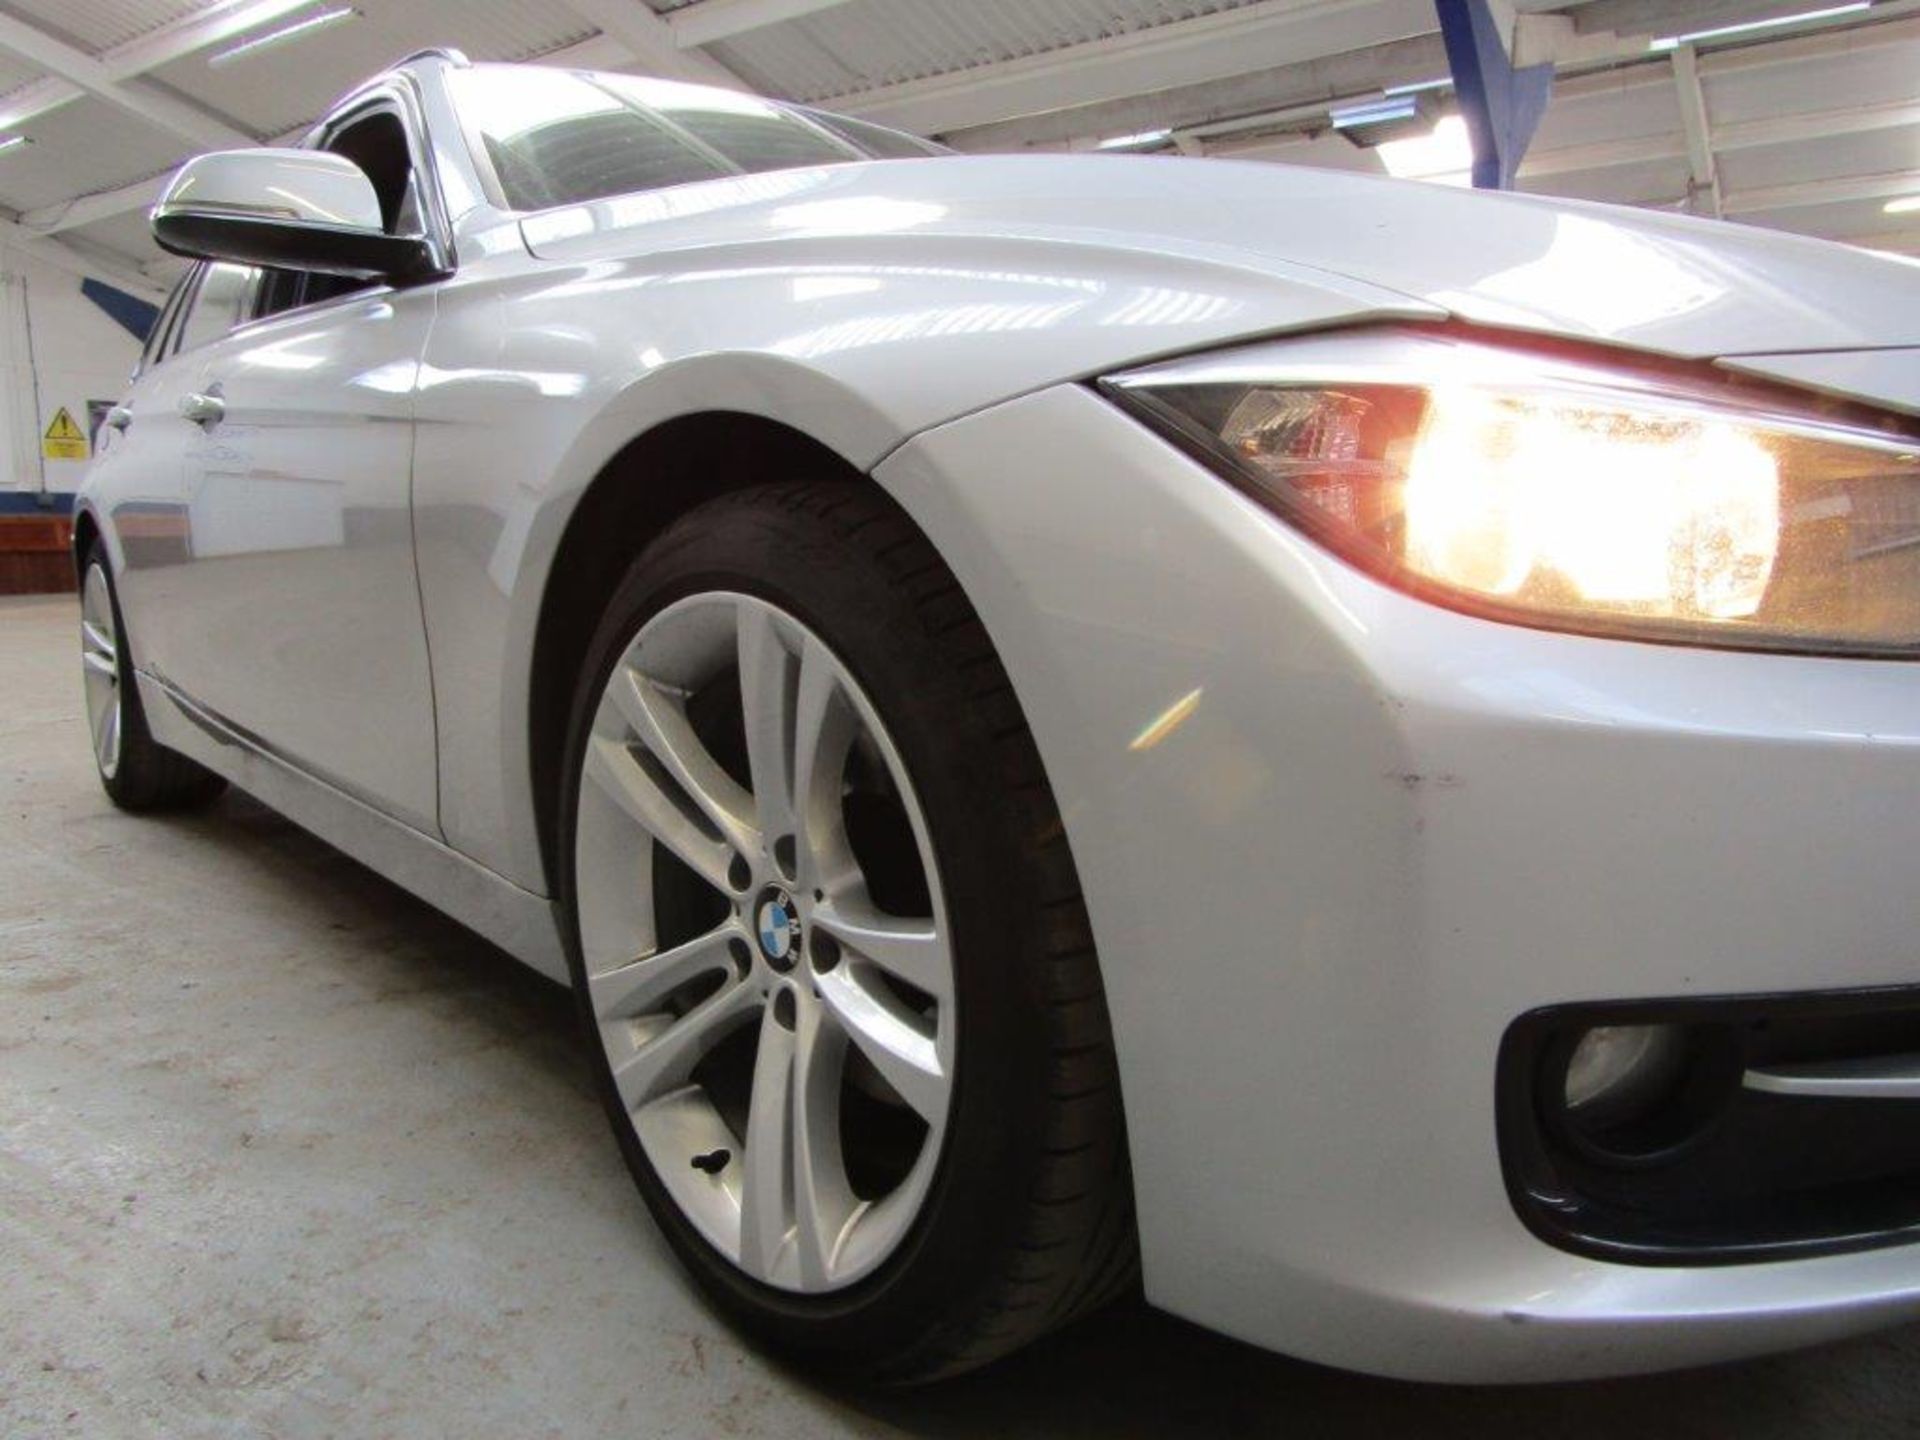 62 12 BMW 320D Sport Touring - Image 15 of 29